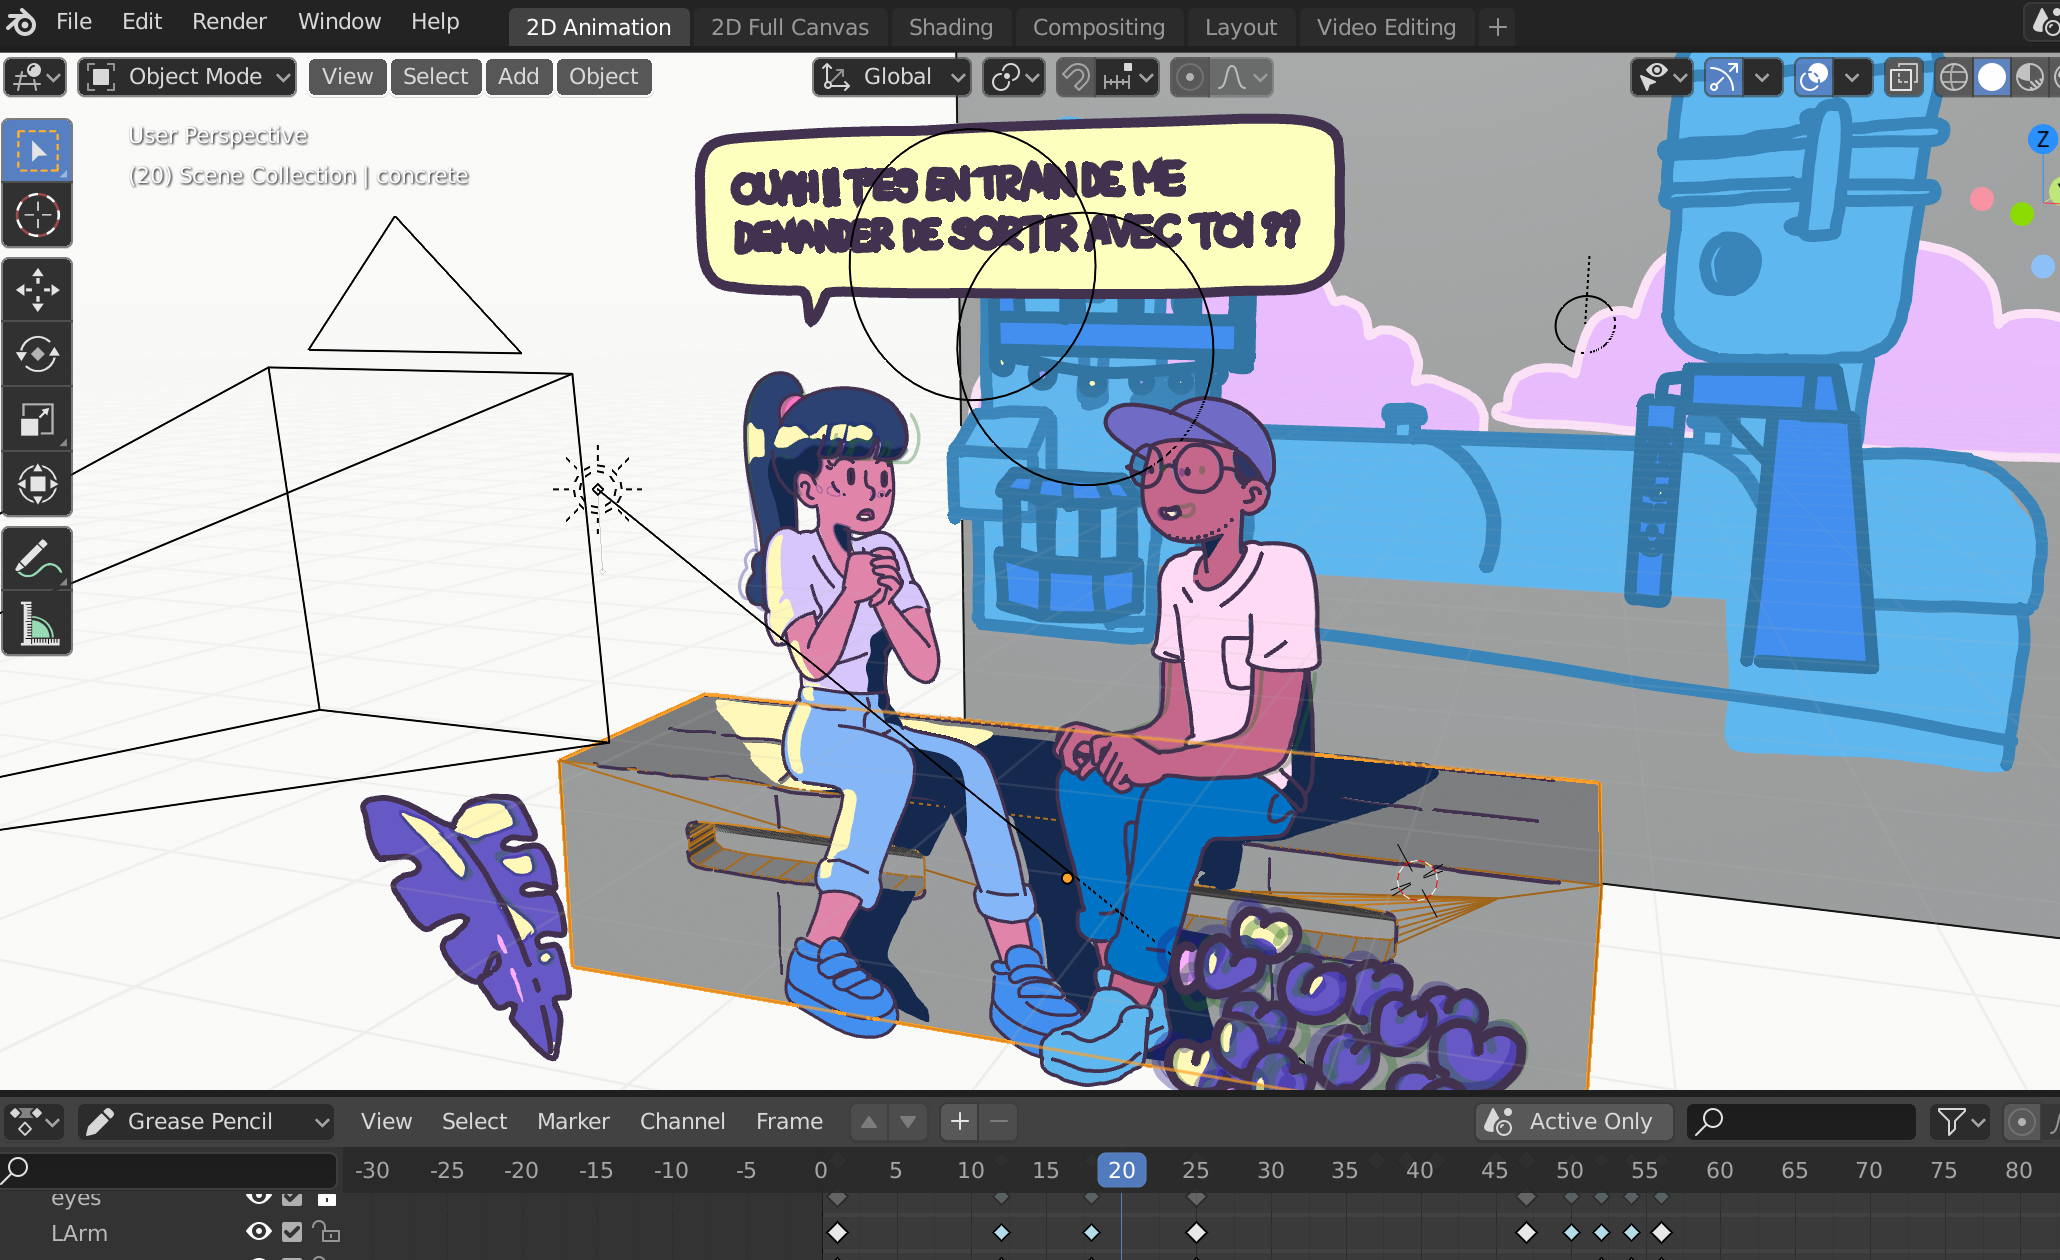 Behind the Scenes: Animated Comic with Grease Pencil - BlenderNation